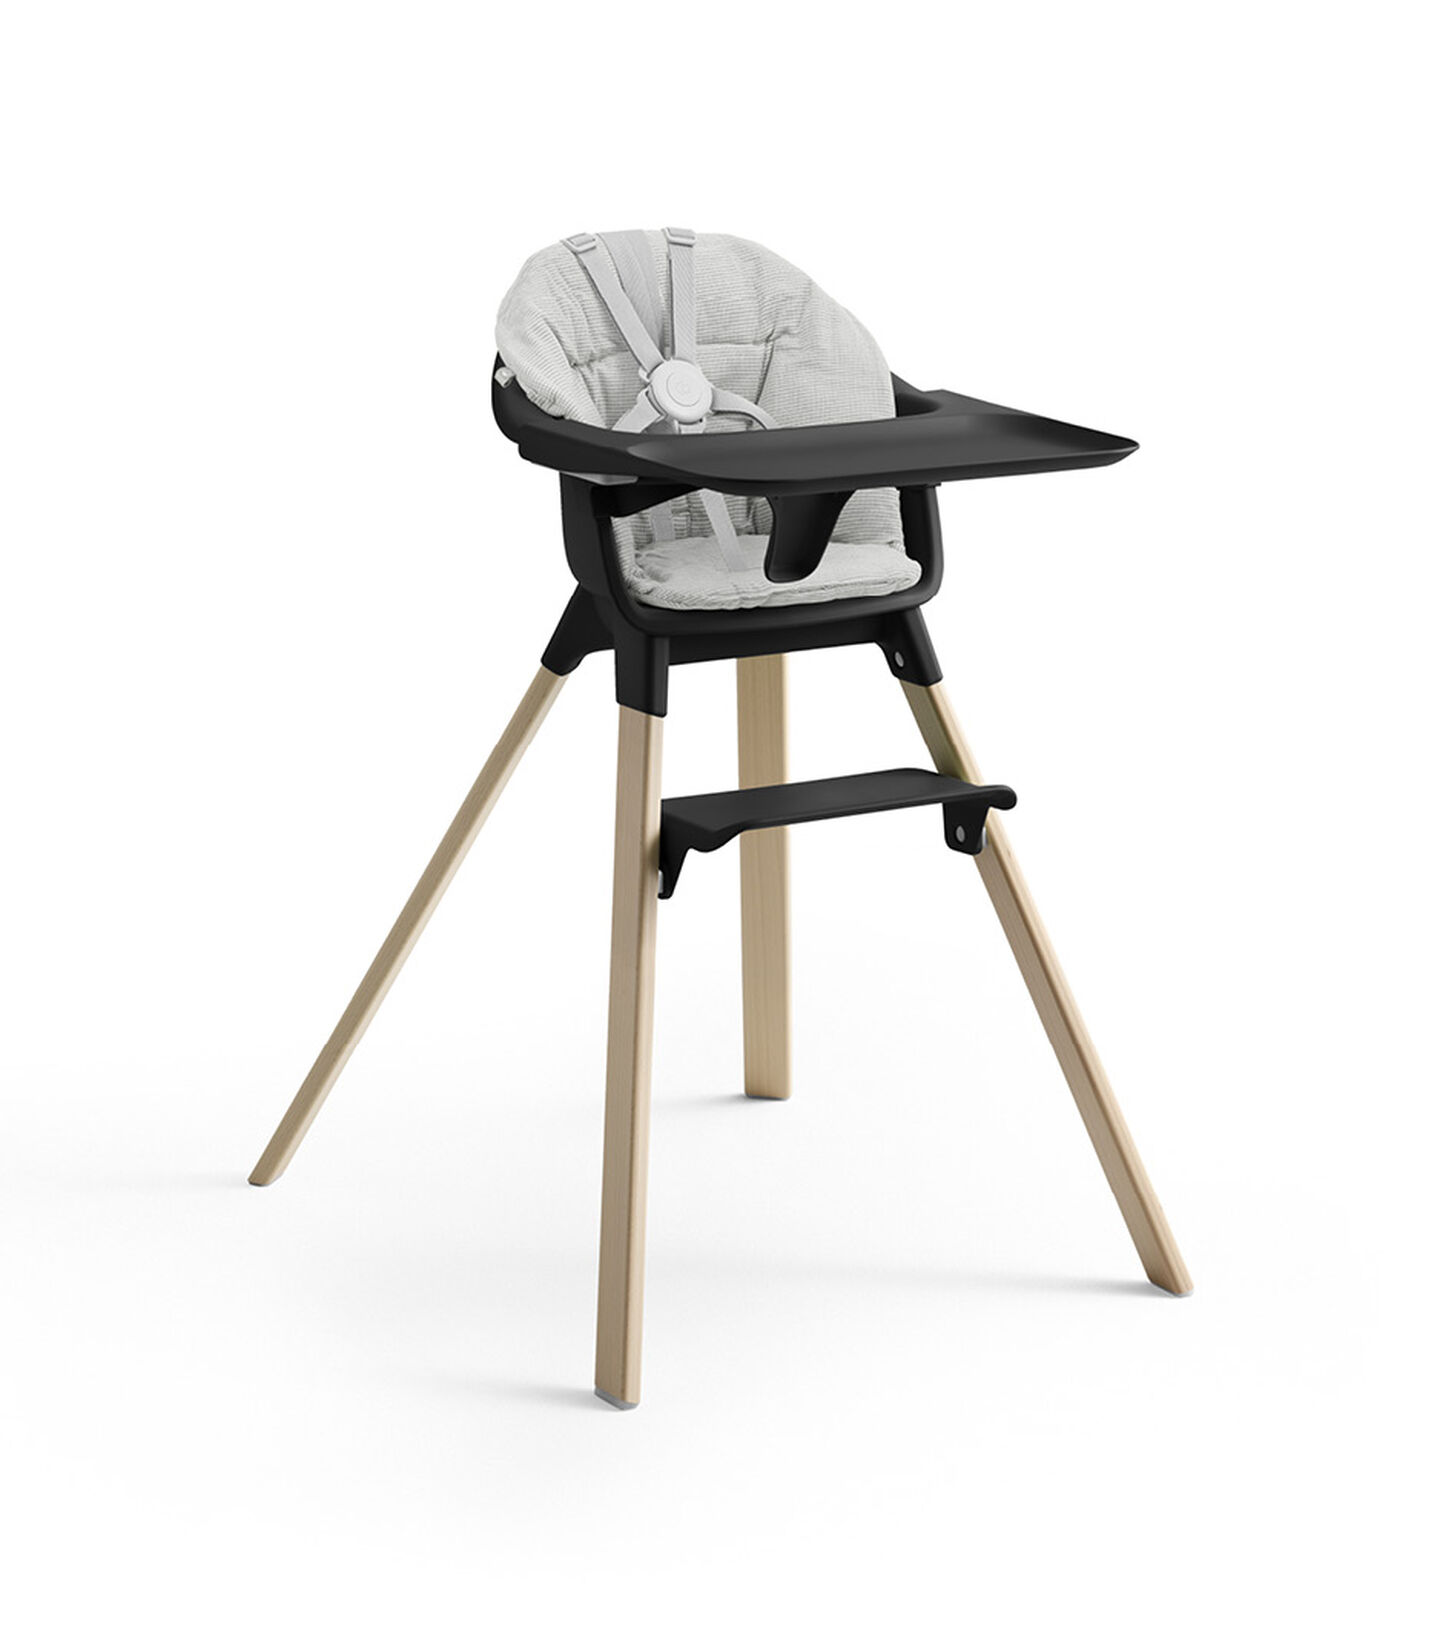 Stokke® Clikk™ High Chair with Tray and Harness, in Natural and Black. Cushion Nordic Grey. view 5